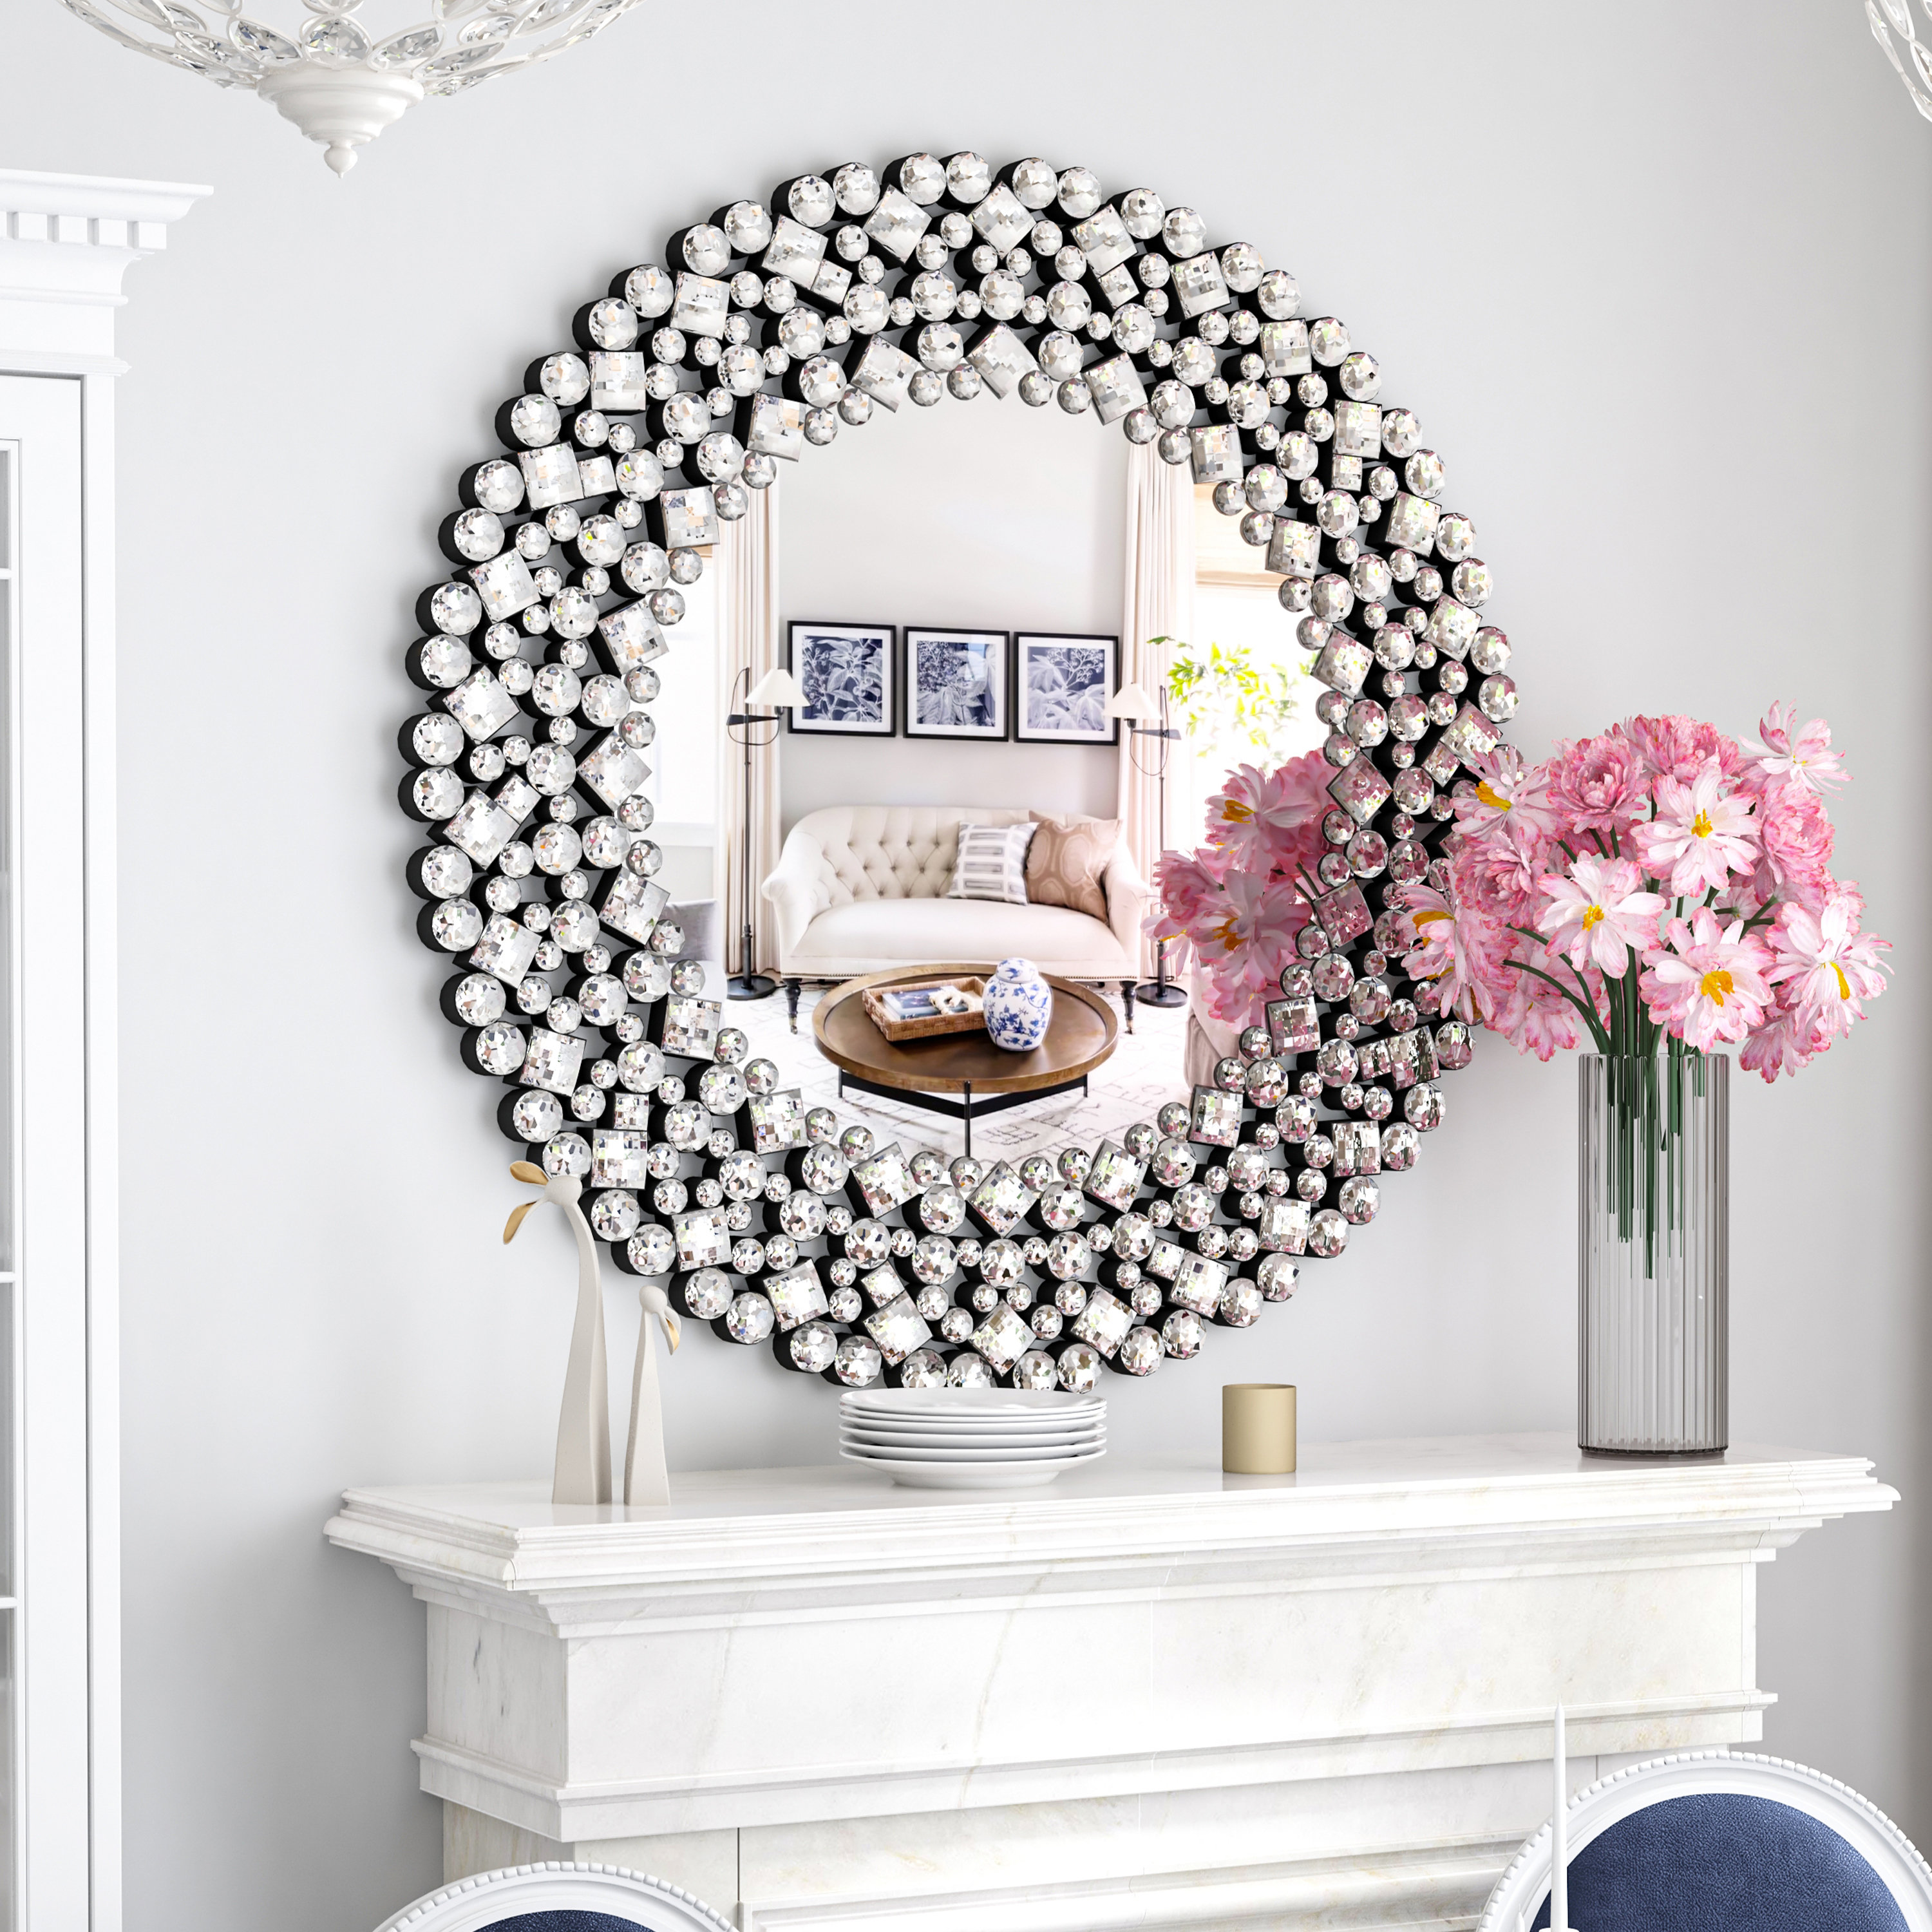 Decorative Round Mirrors Silver Wall Mirror Accent Wall Diamond Mirror for Living Room Home Decor - 32 inch, Size: One Size